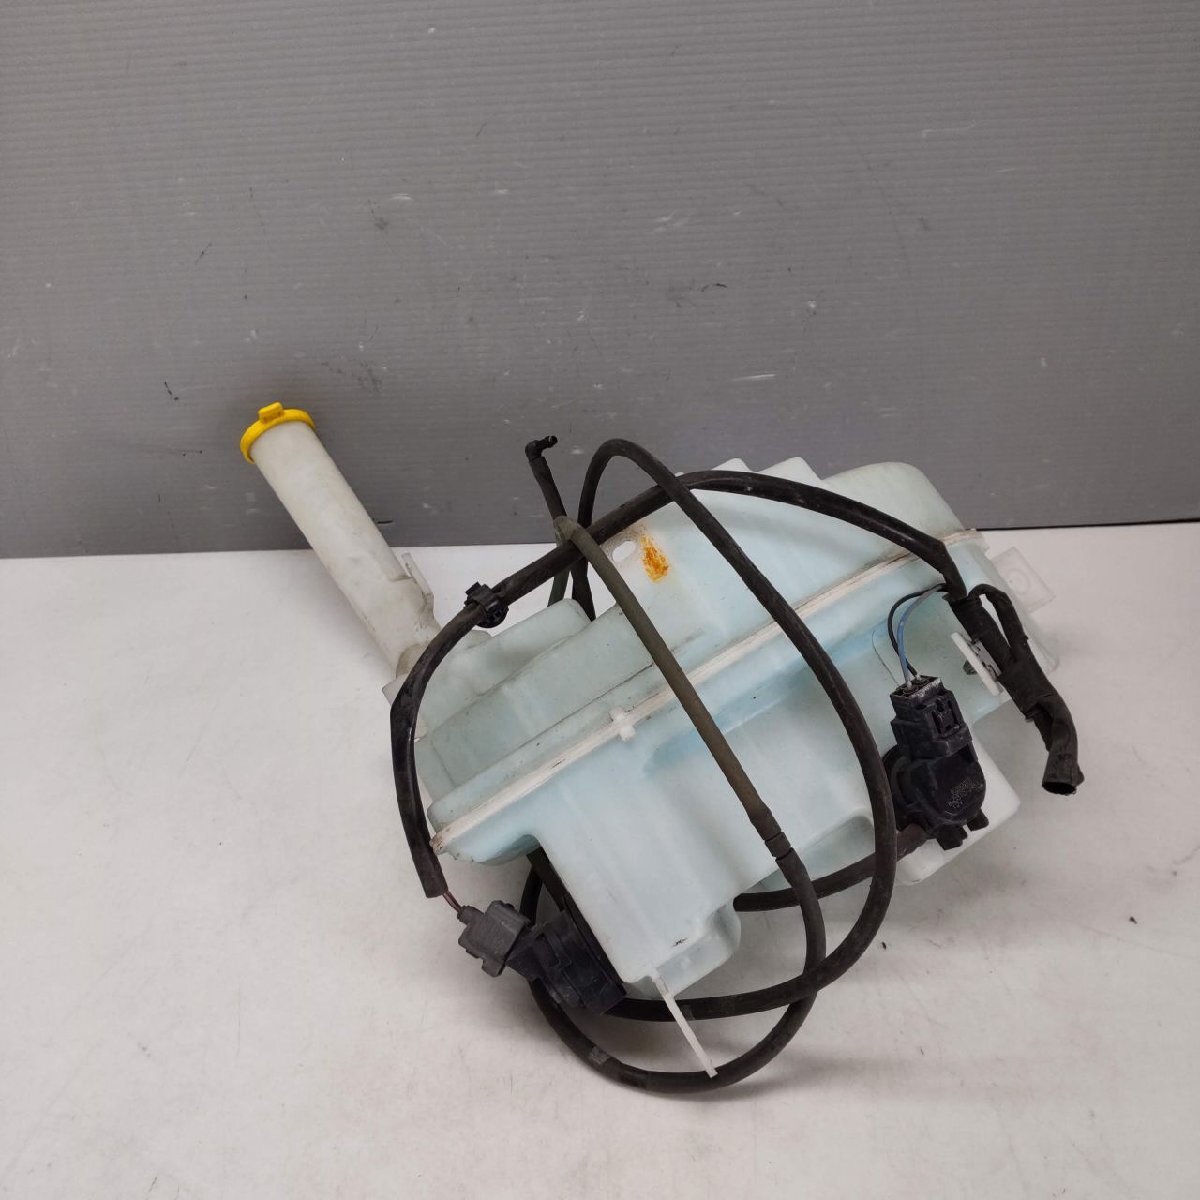 CCEFW Biante original washer tank 2Z3-26-8/24C3018* including in a package un- possible 